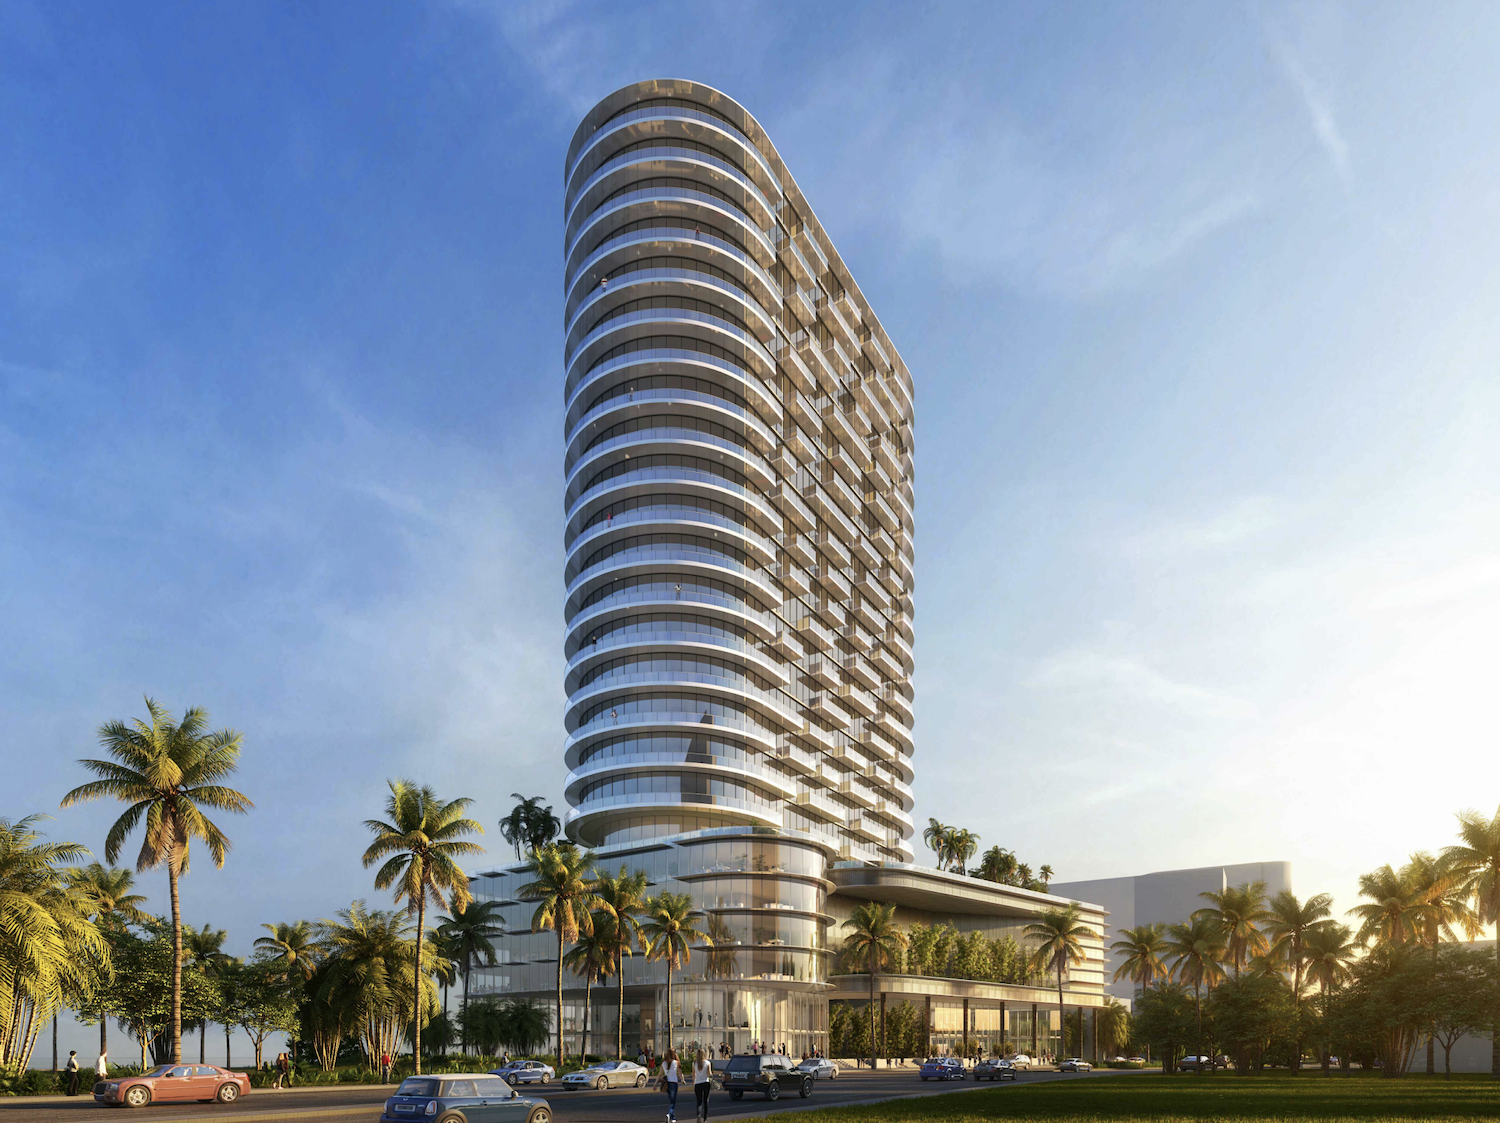 Developers File Coastline Review for a 30 Story Mixed Use Tower